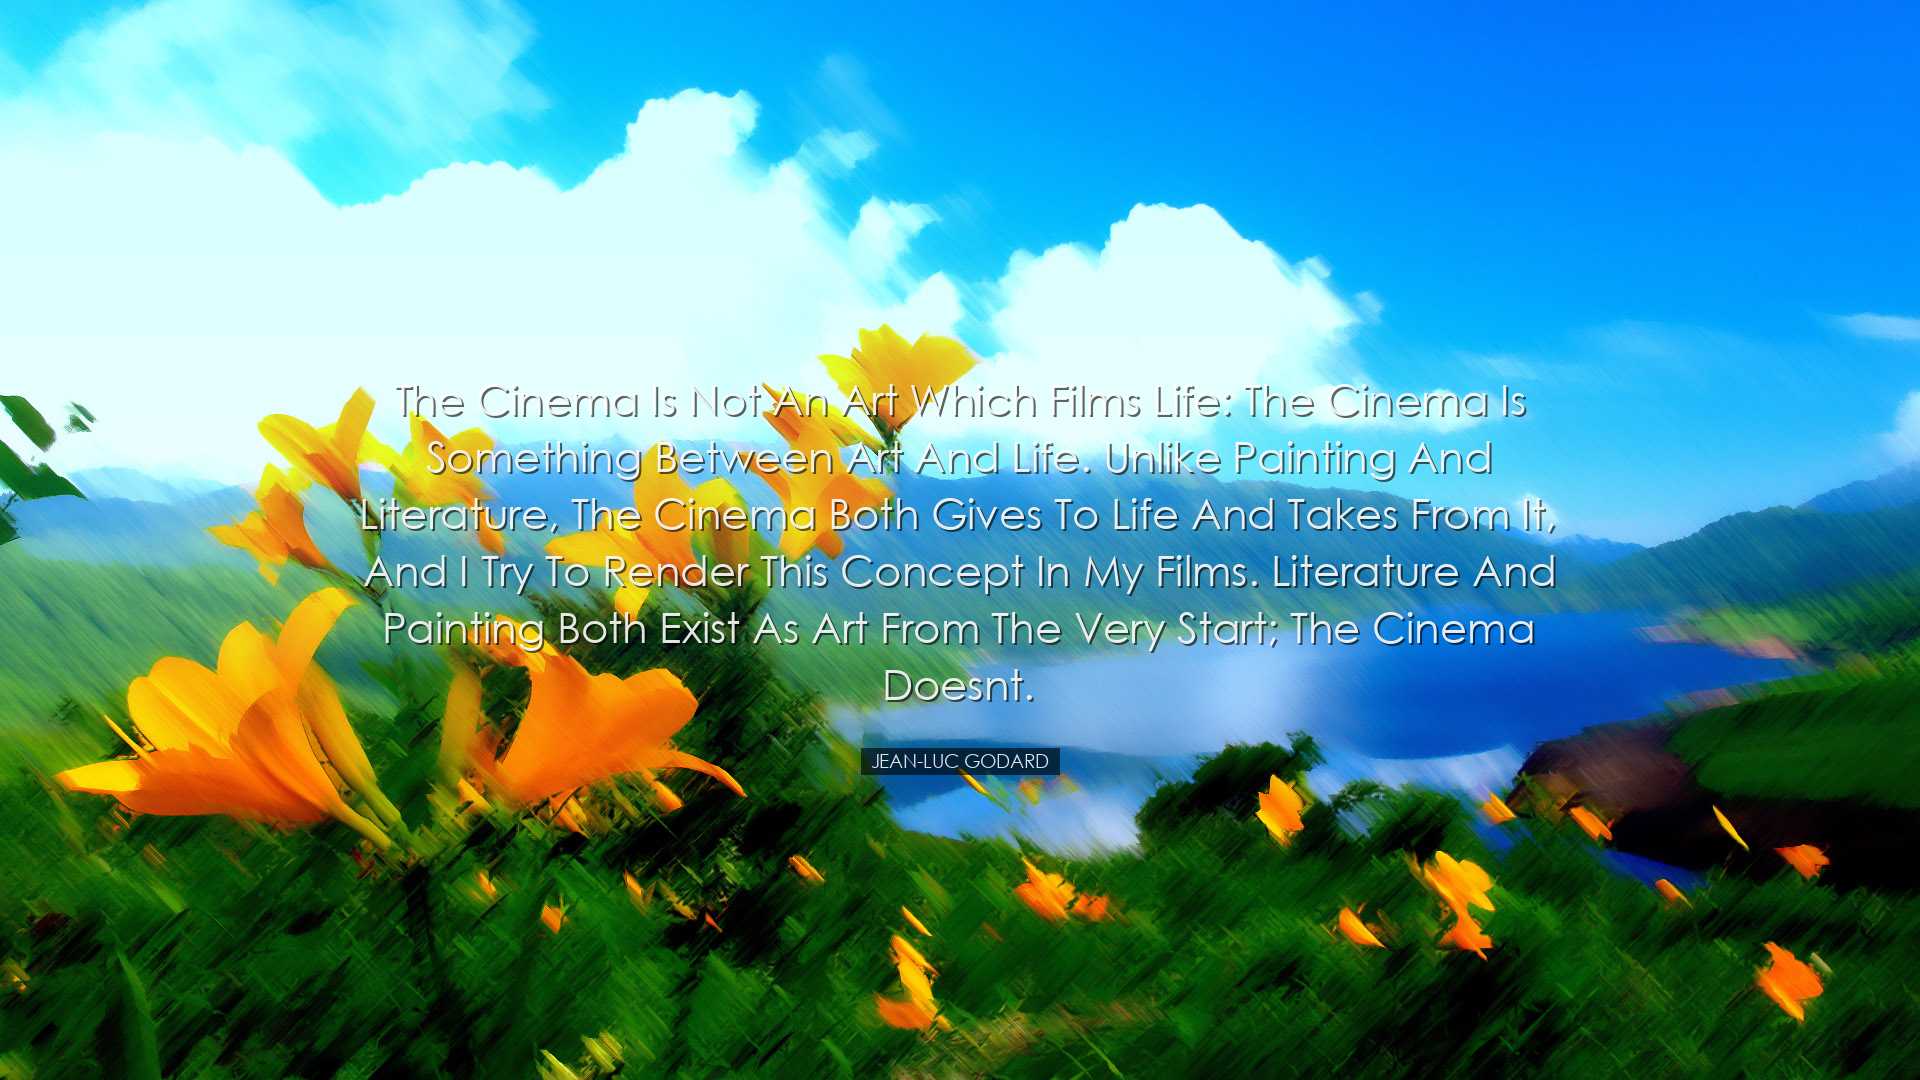 The cinema is not an art which films life: the cinema is something